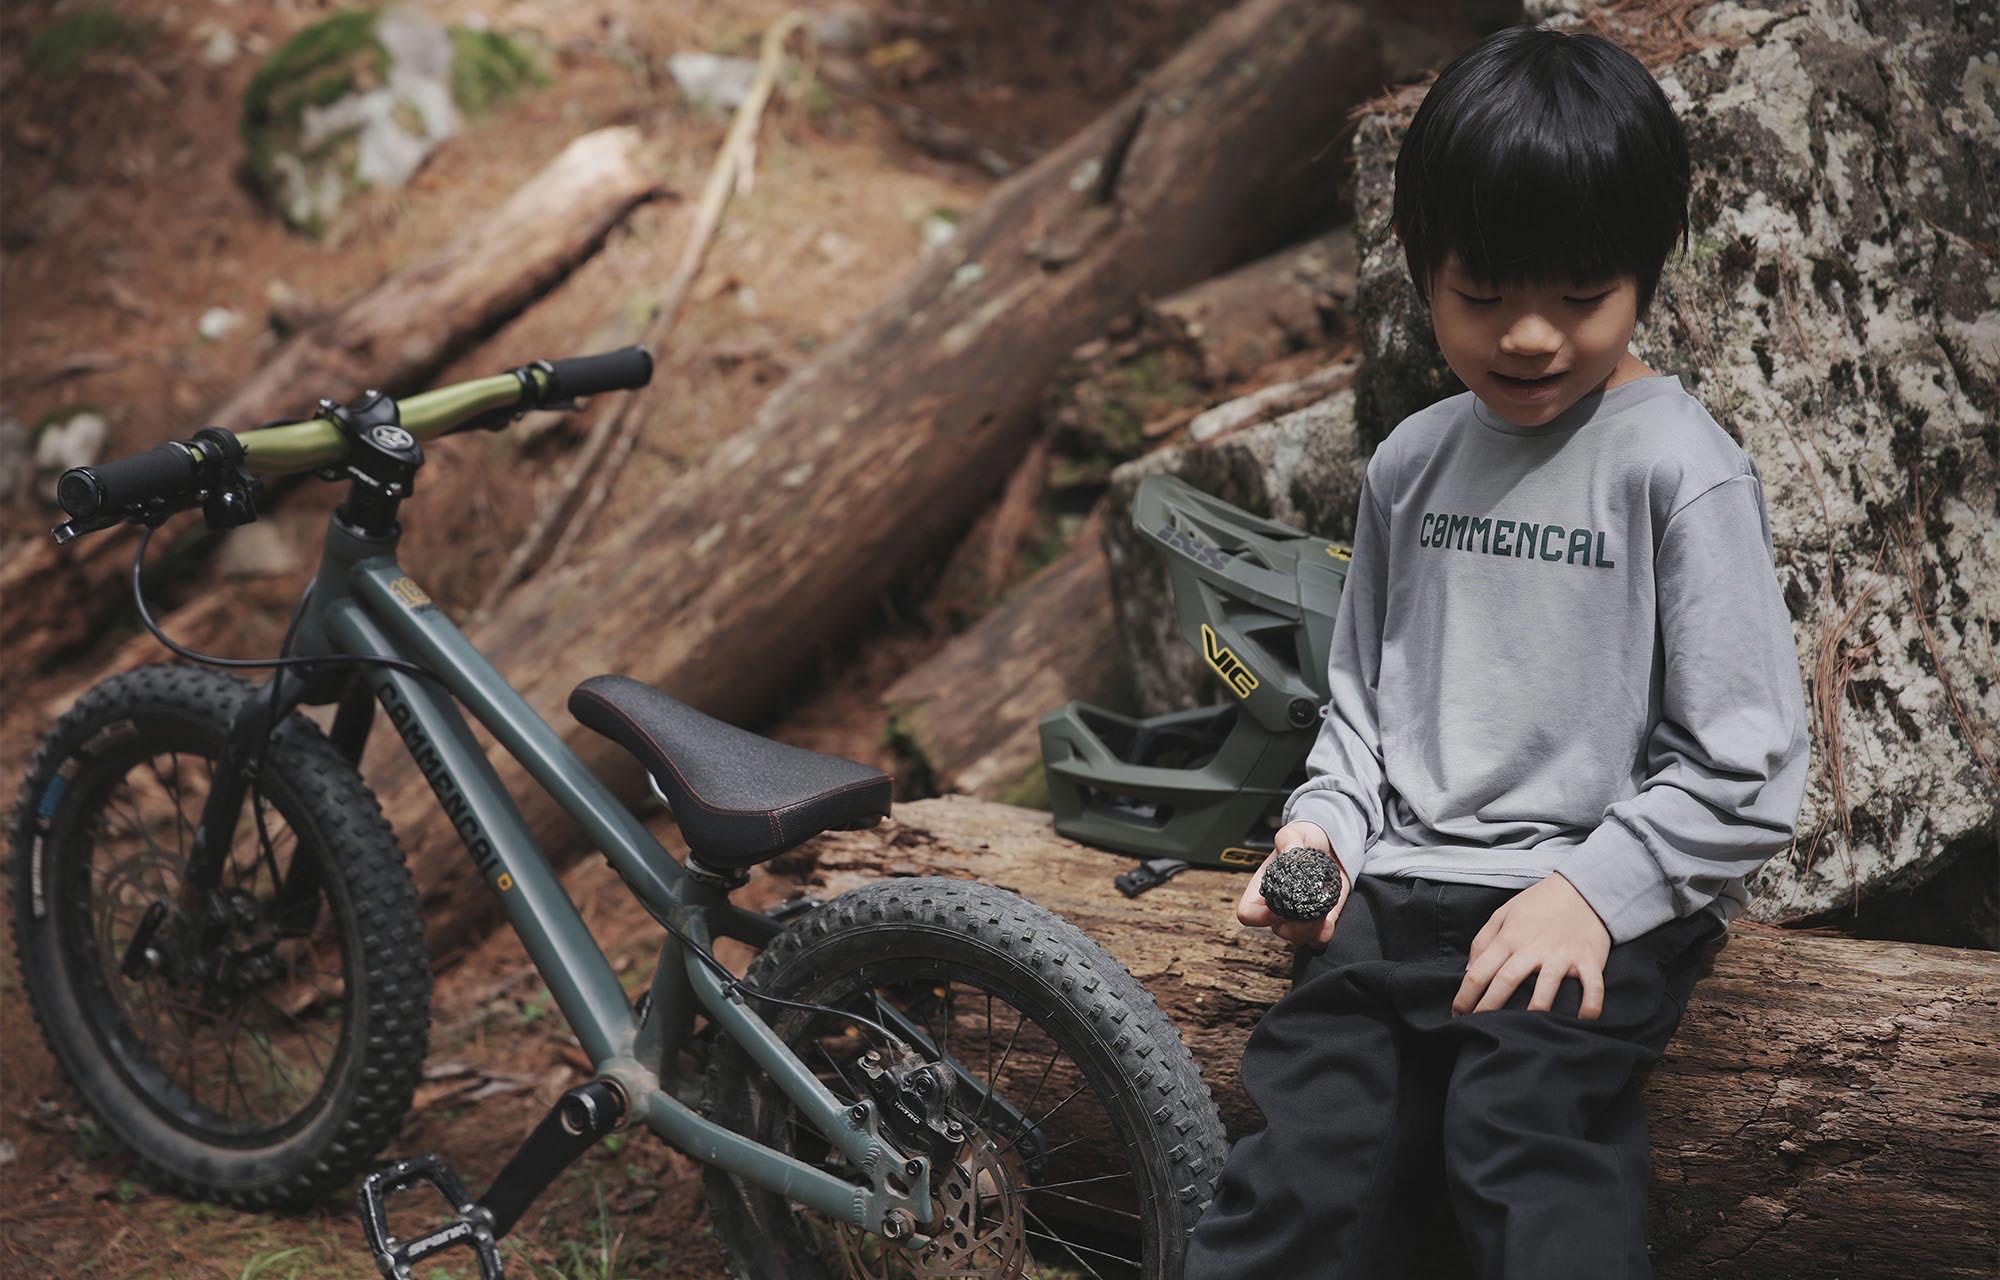 COMMENCAL KIDS LONG SLEEVE TECH-TEE GREY image number null